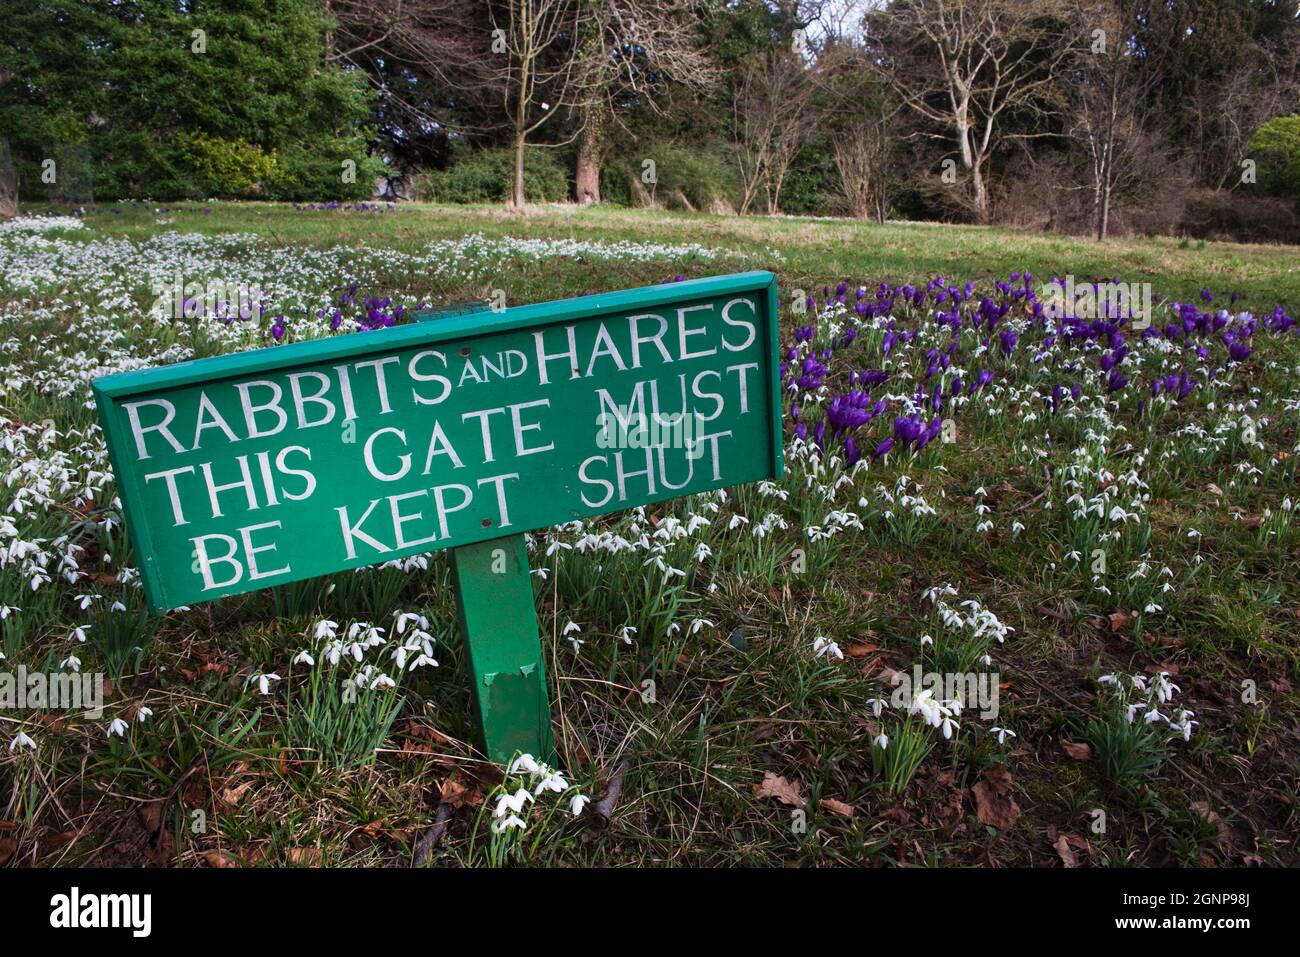 Keep gate closed sign to protect gardens from rabbits and hares, Howick Hall, Northumberland Stock Photo